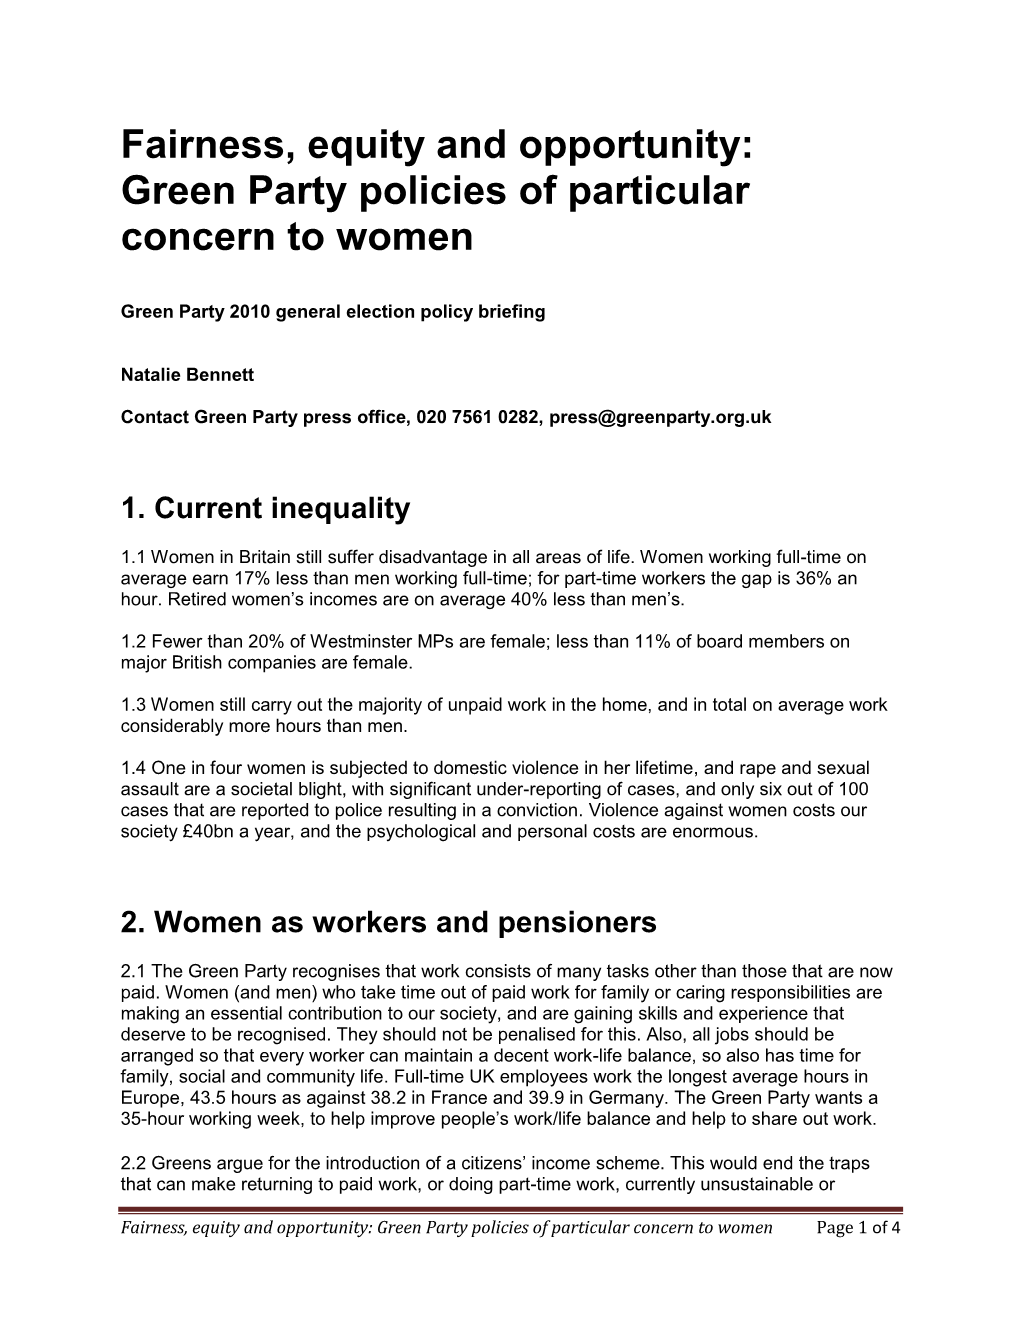 Fairness, Equity and Opportunity: Green Party Policies of Particular Concern to Women